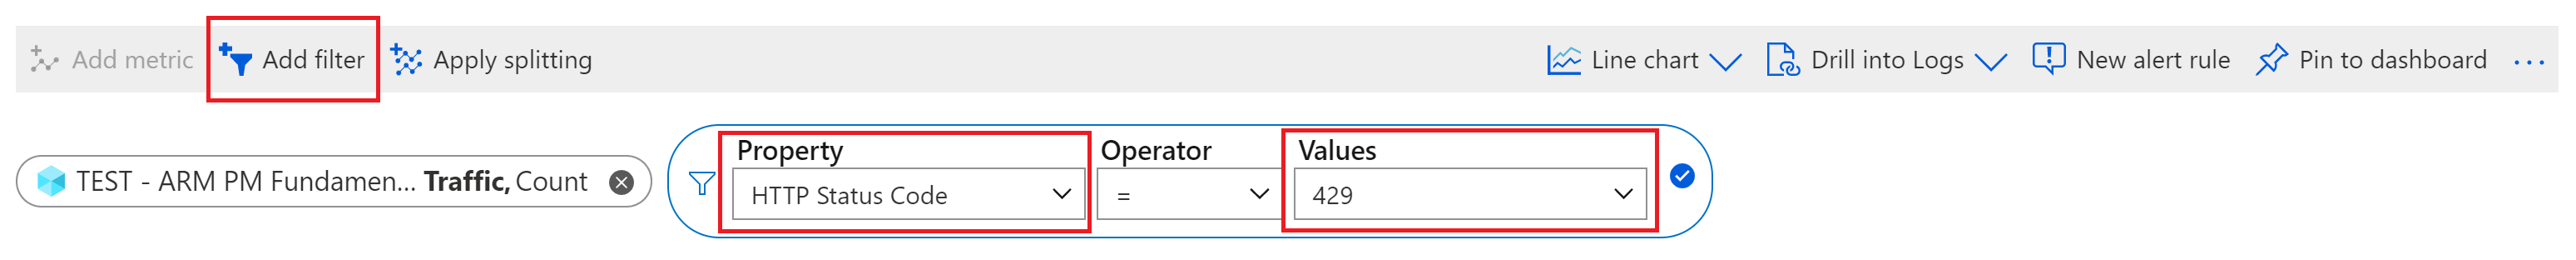 Screenshot of filtering HTTP Status Code to 429 responses only in the Azure portal.